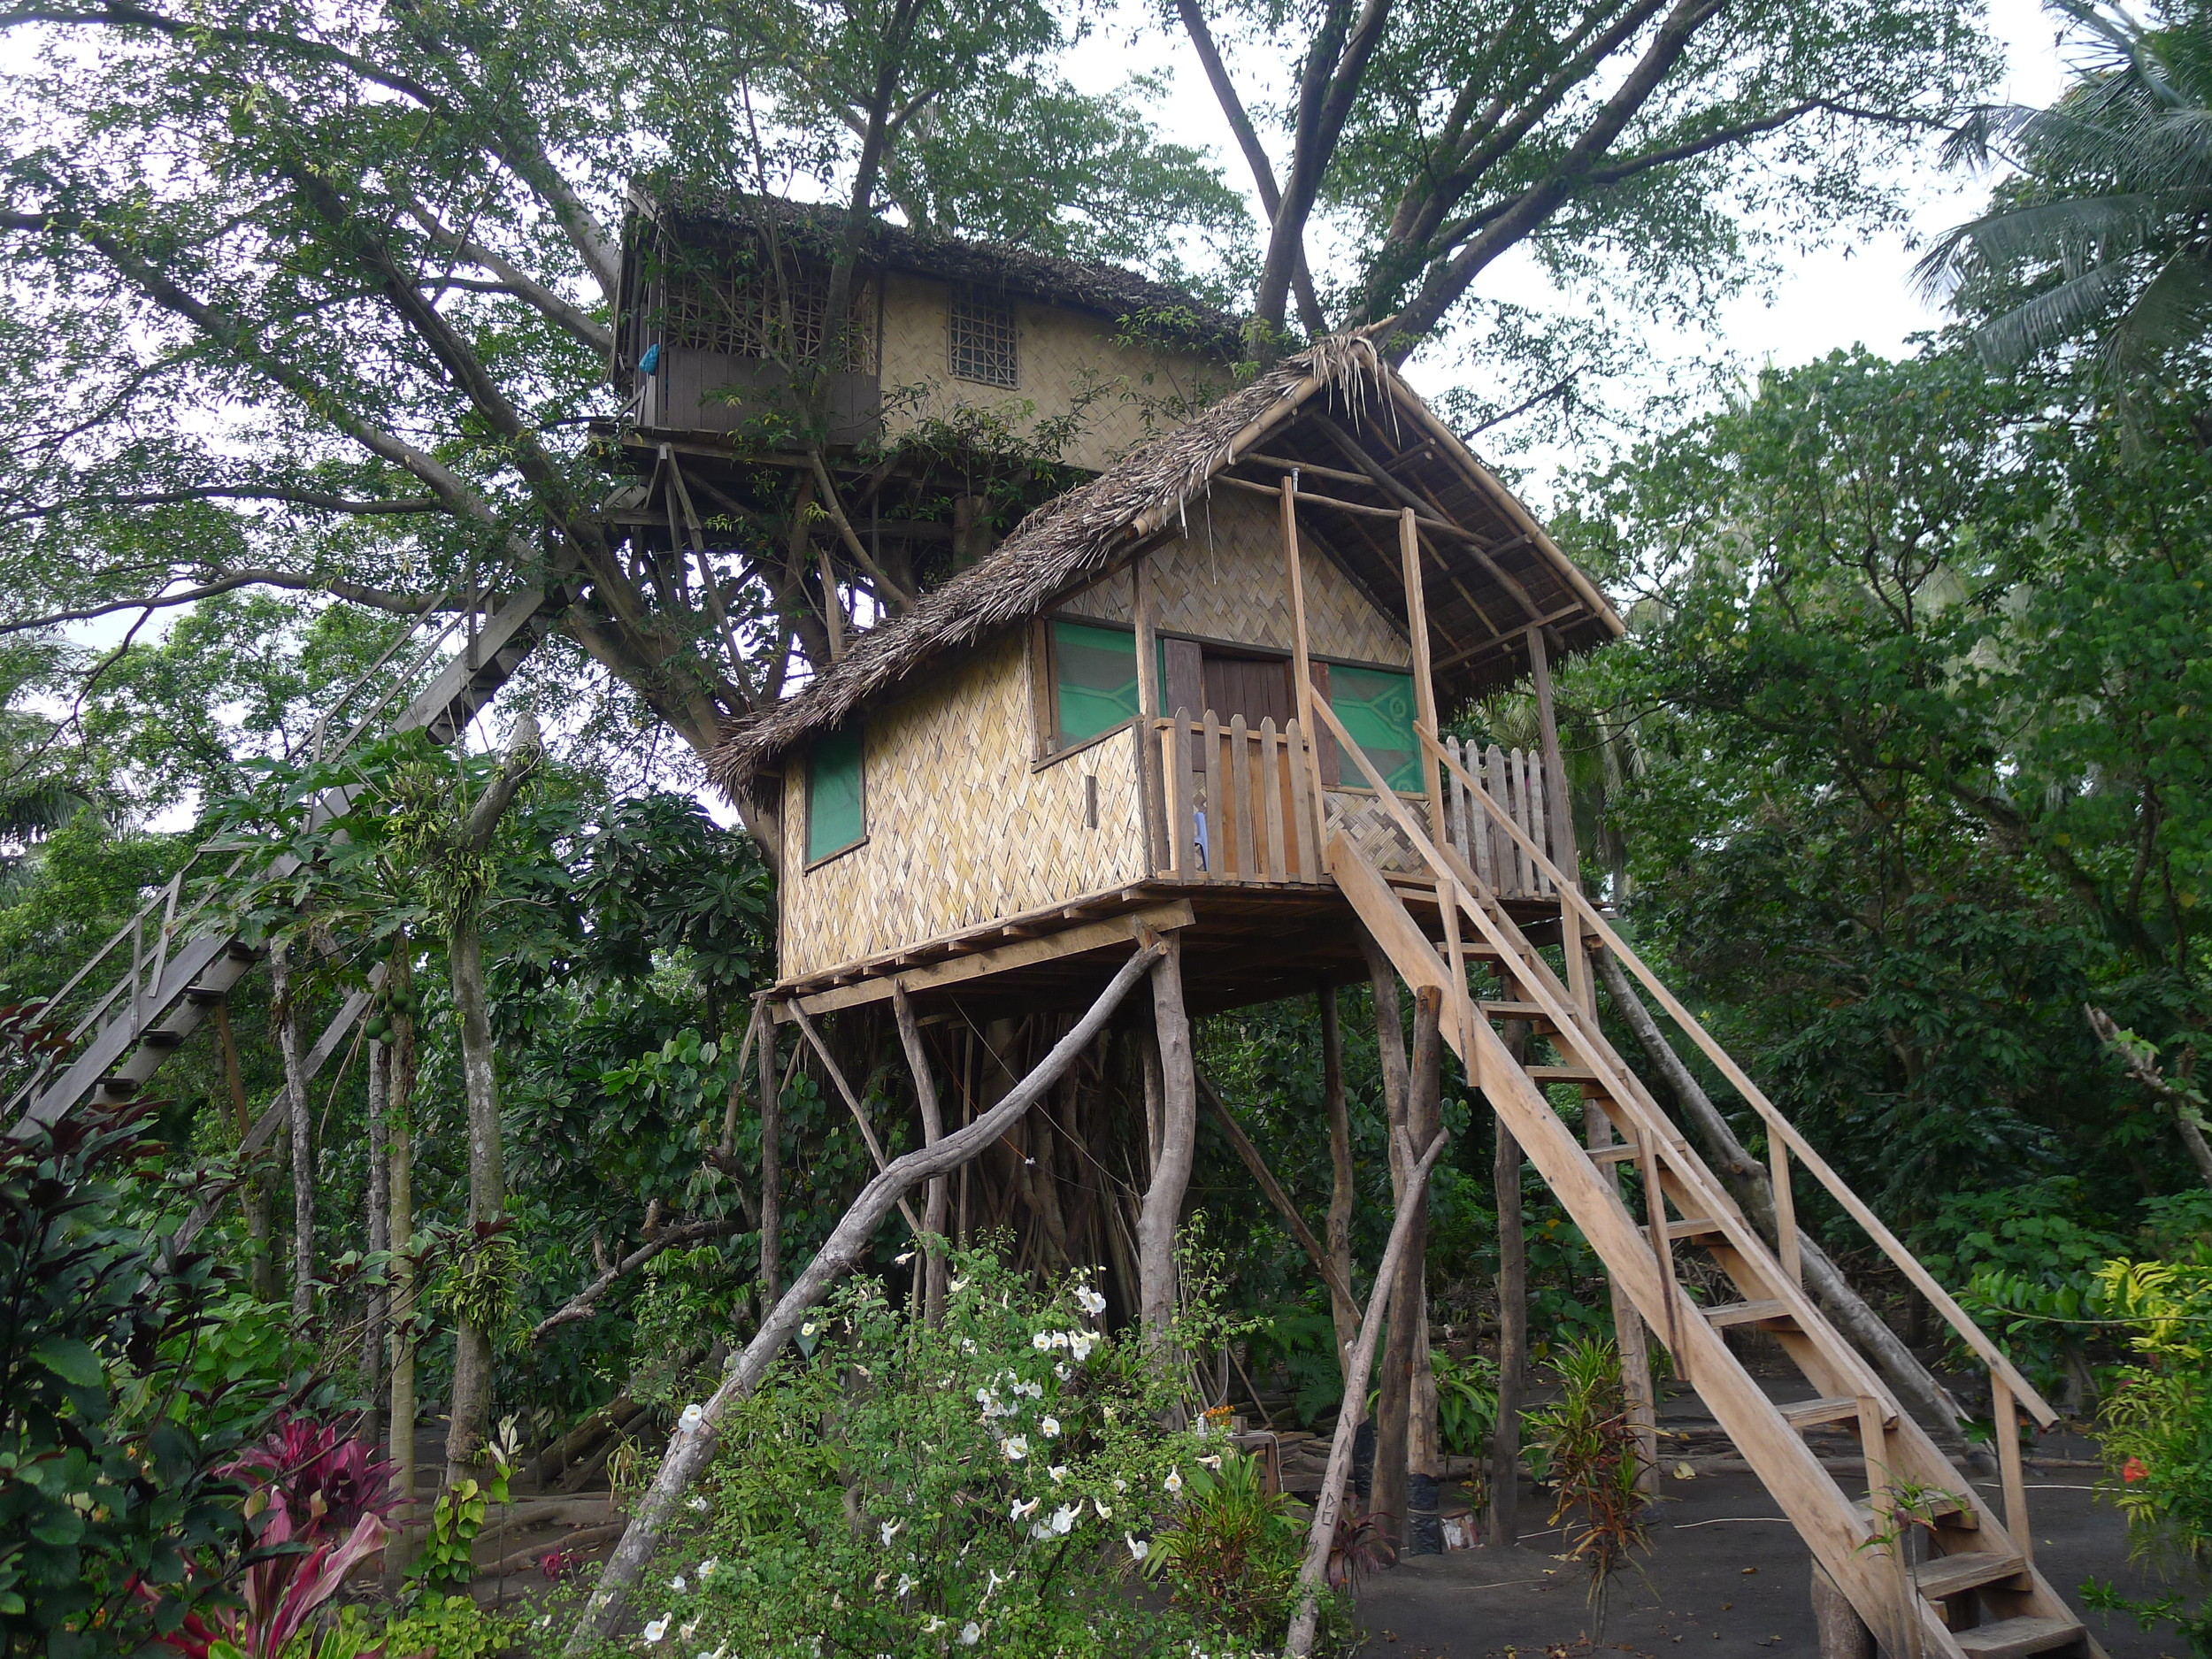  OUR TREEHOUSE HUT.&nbsp; 